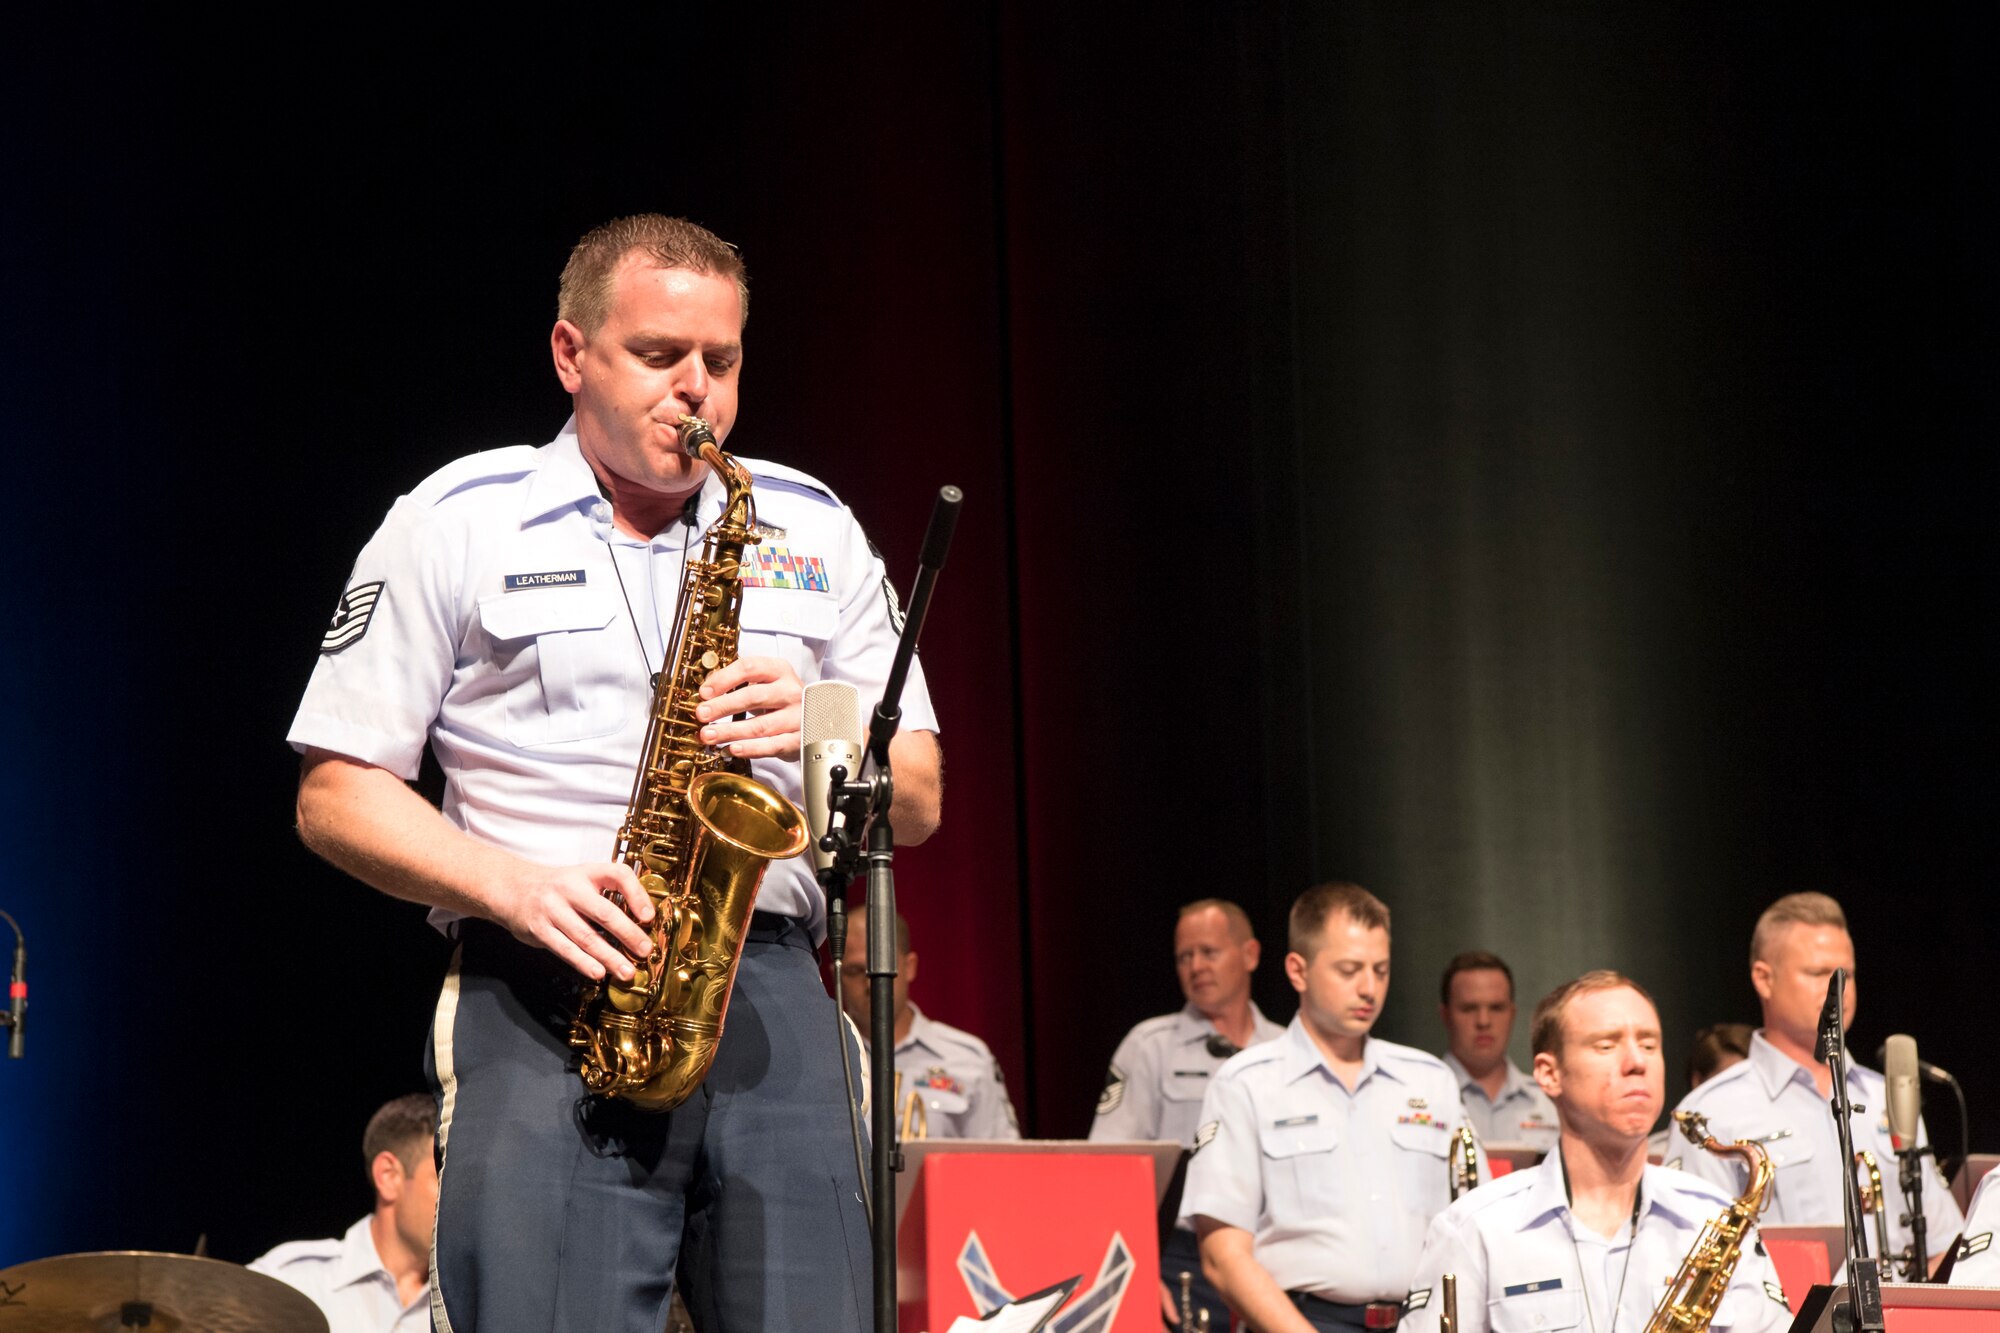 Tech. Sgt. Ryan Leatherman, U.S. Air Force Band of Mid-America Shades of Blue Jazz Ensemble saxophonist, performs a solo during a concert at the Honeywell Center in Wabash, Indiana Sept. 10, 2019. Prior to joining the Air Force his career took him throughout the United States and Europe, where he performed with renowned artists in a variety of musical styles, including Dick Oatts, Bobby Shew, Sinfonia da Camera, and The Temptations. (U.S. Air Force photo/Master Sgt. Ben Mota)